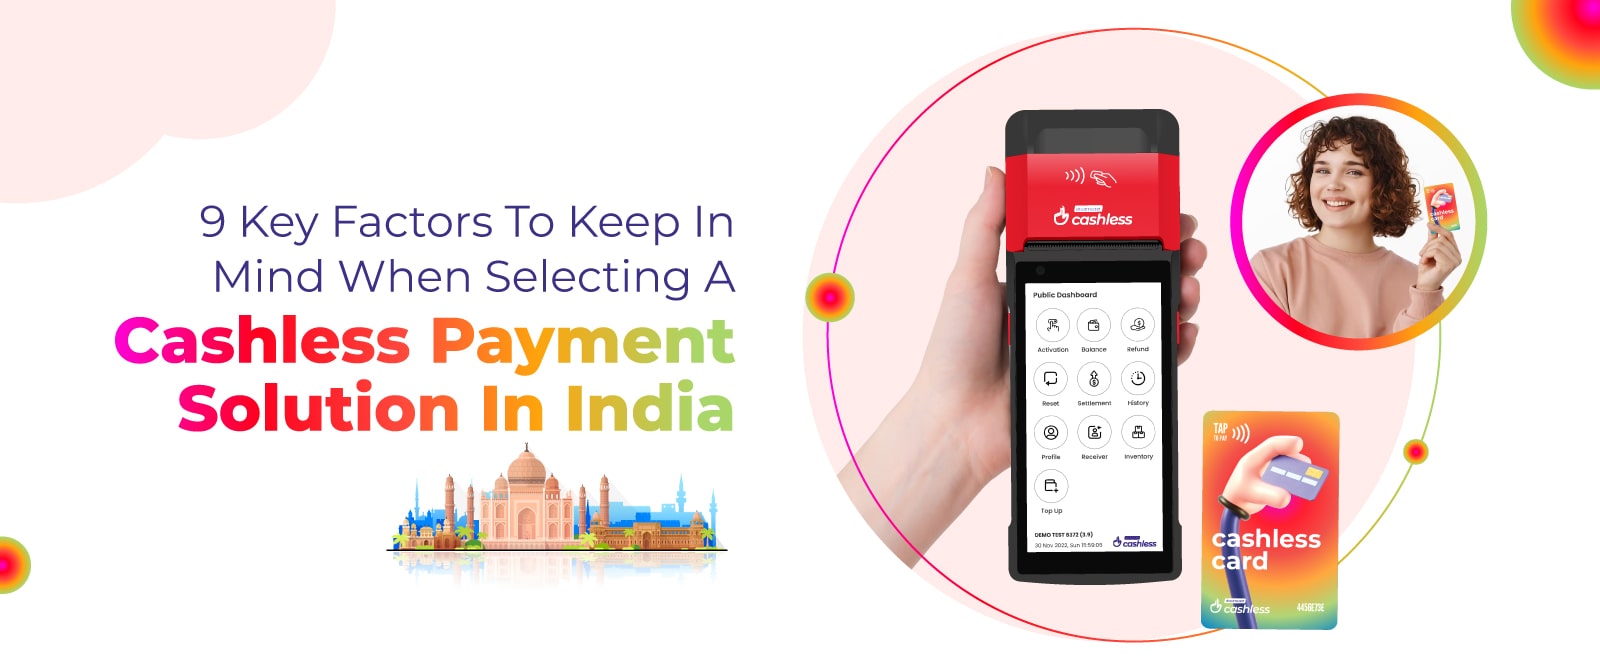 9 Key Factors to Keep in Mind When Selecting a Cashless Payment Solution in India